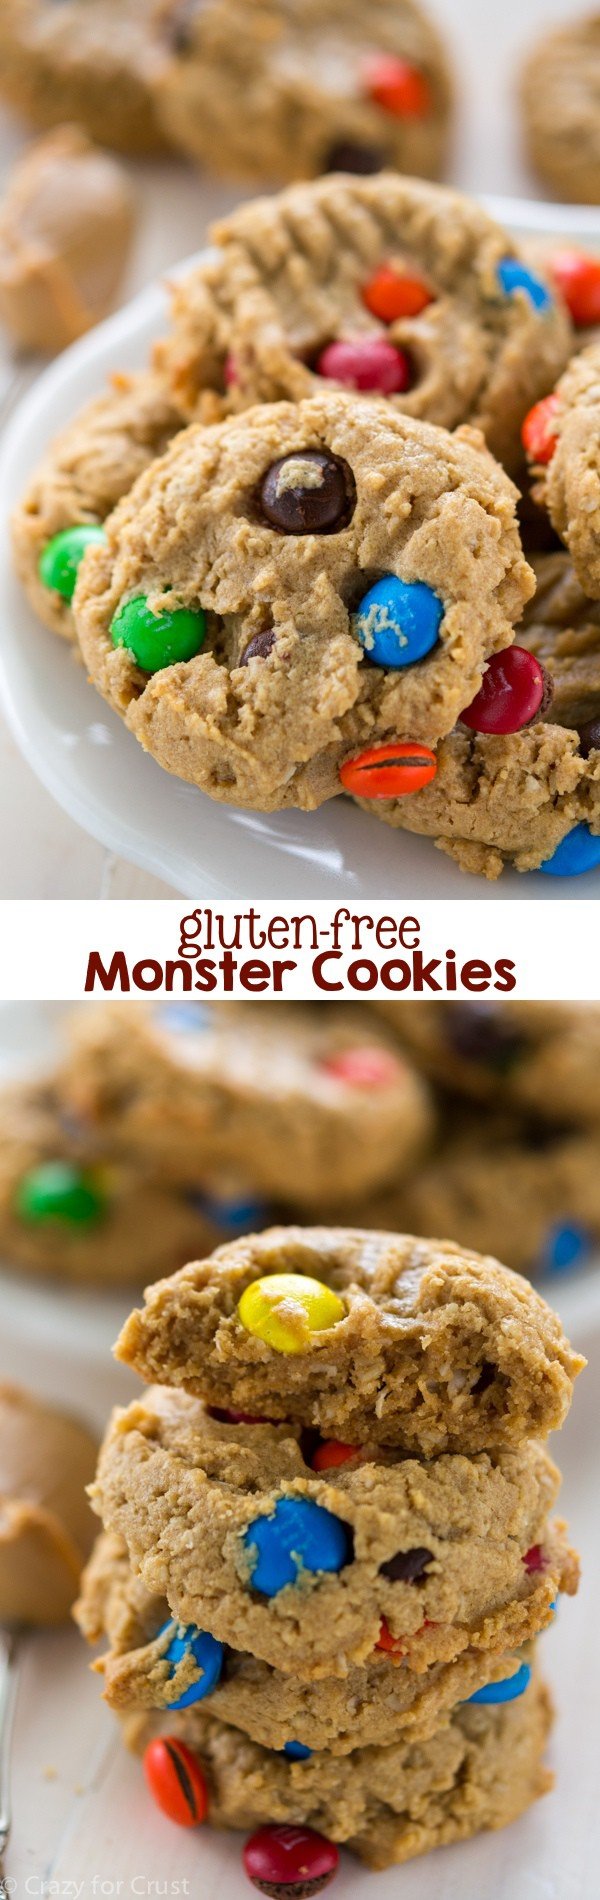 Gluten Free Monster Cookies are full of peanut butter, gluten free oats, and candy. No one will miss the gluten!